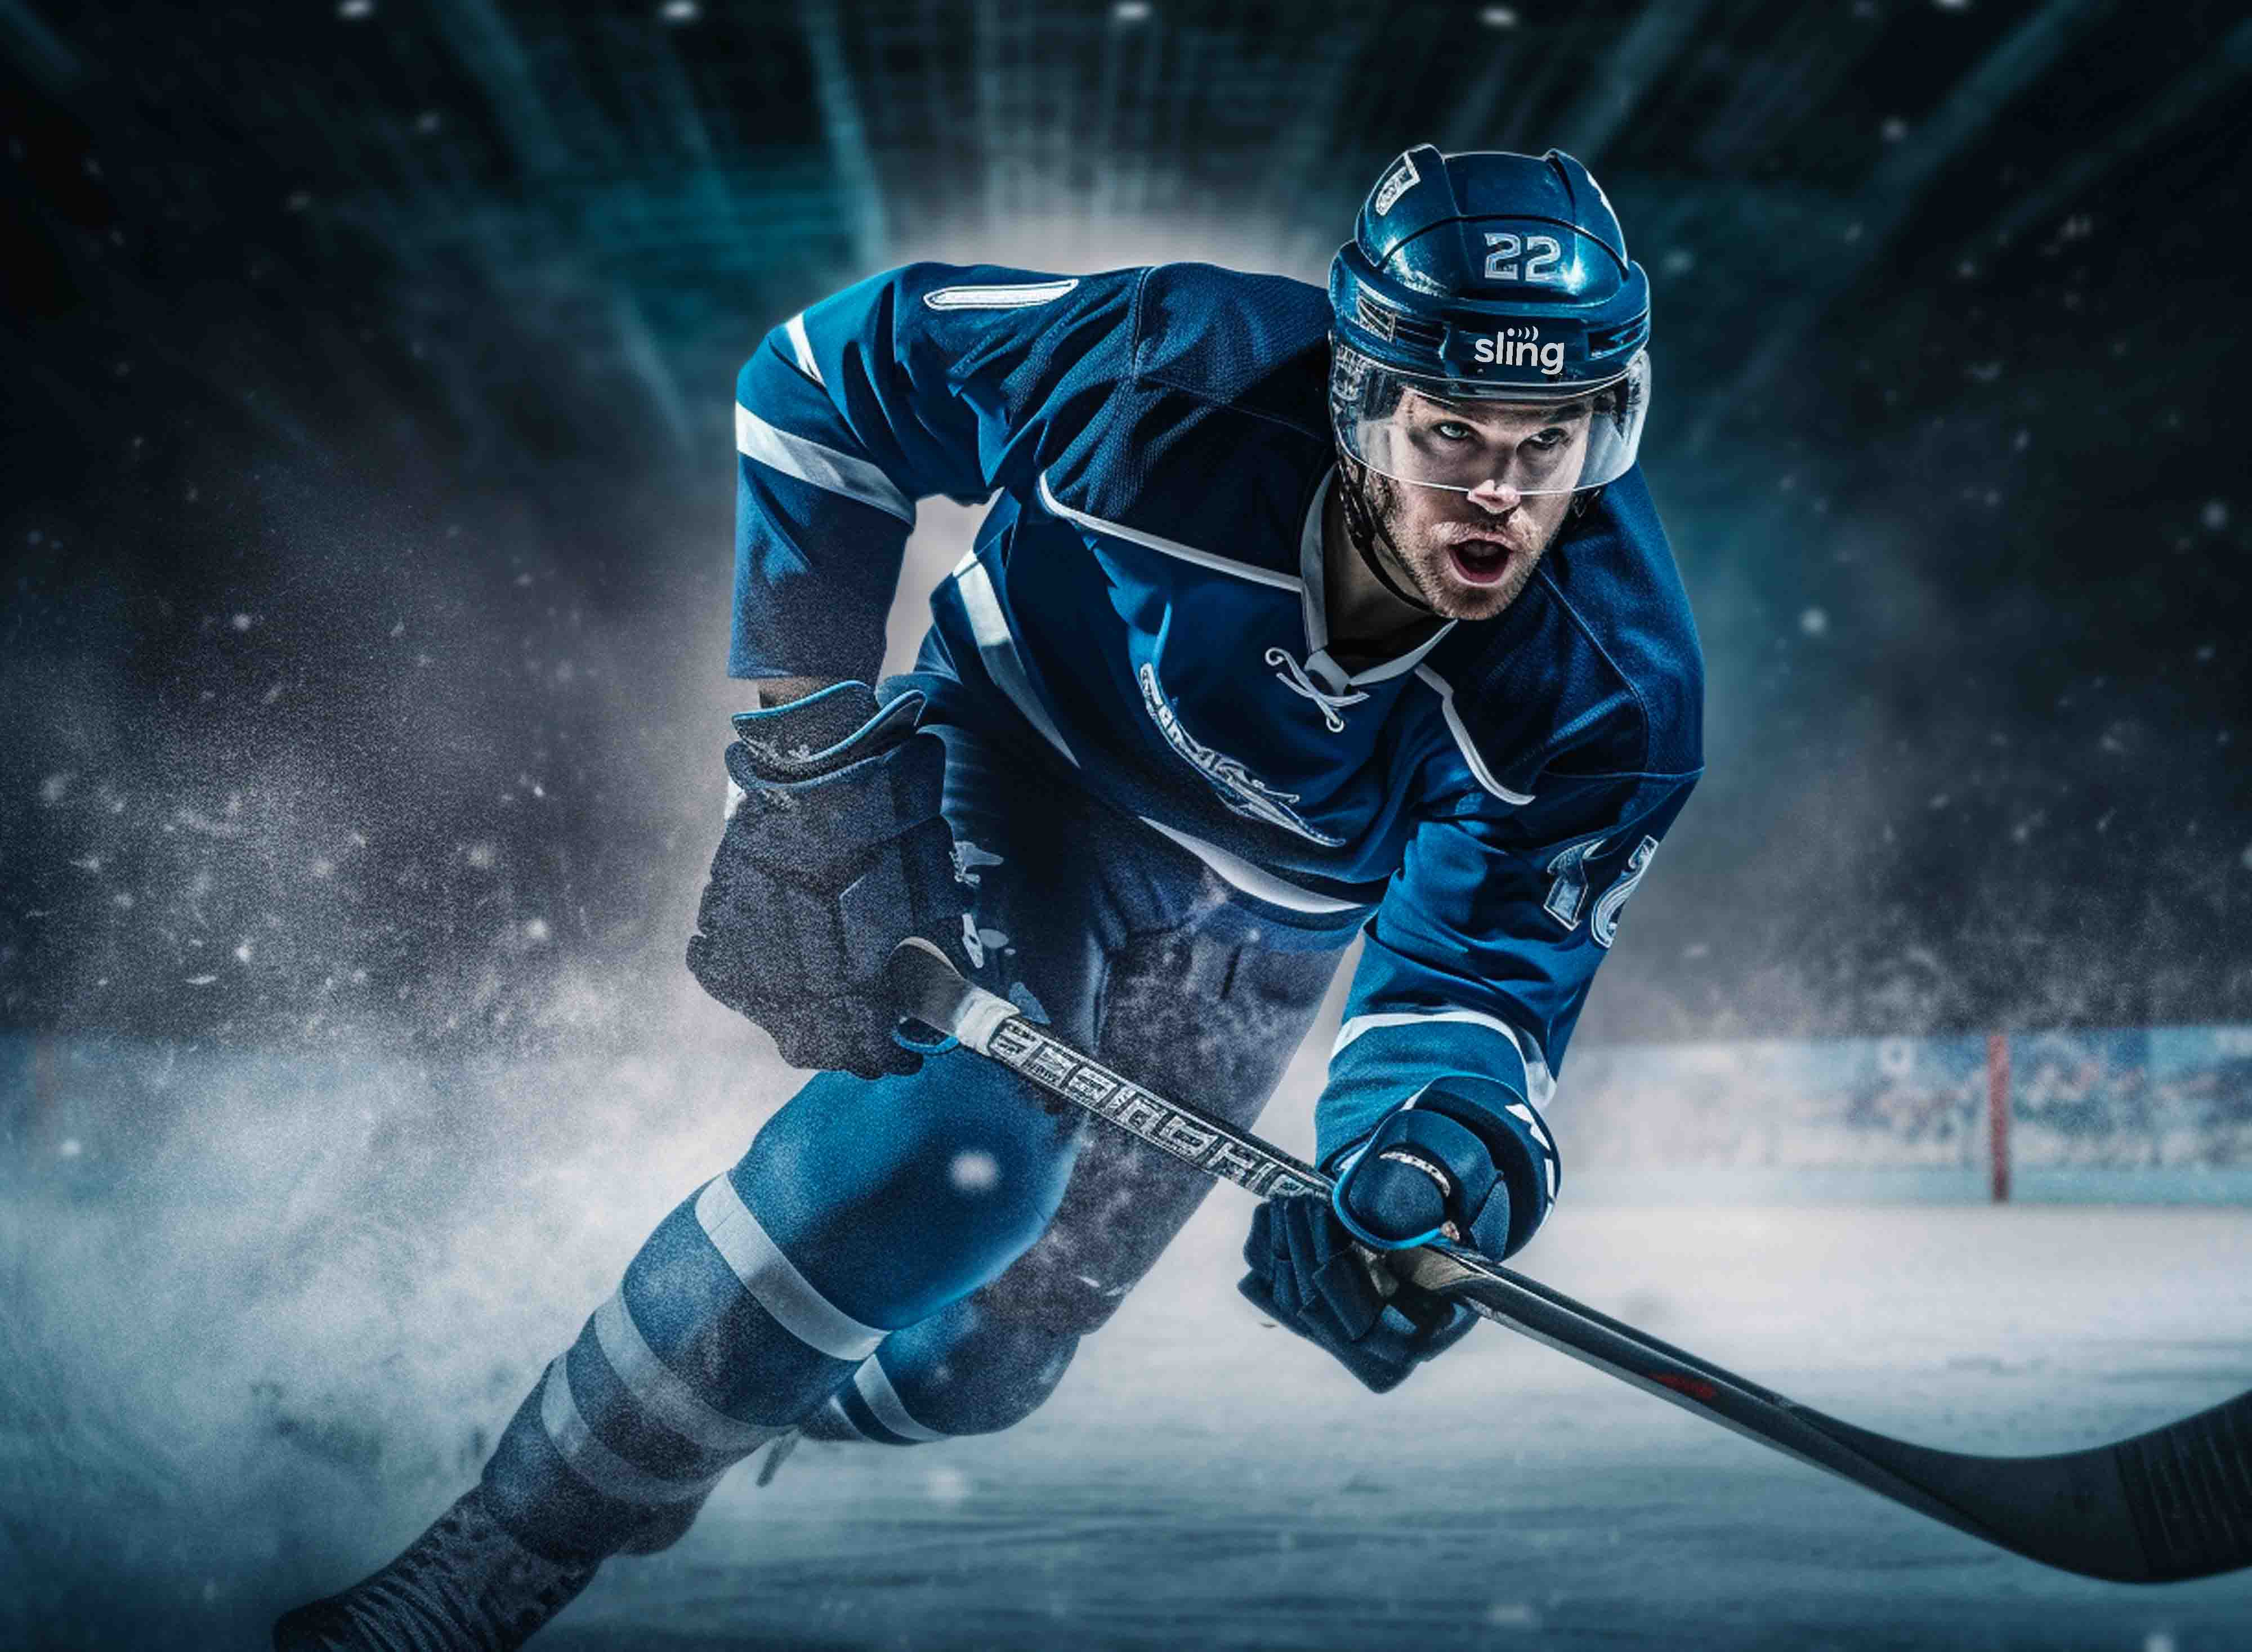 Watch NHL Hockey Live With Sling